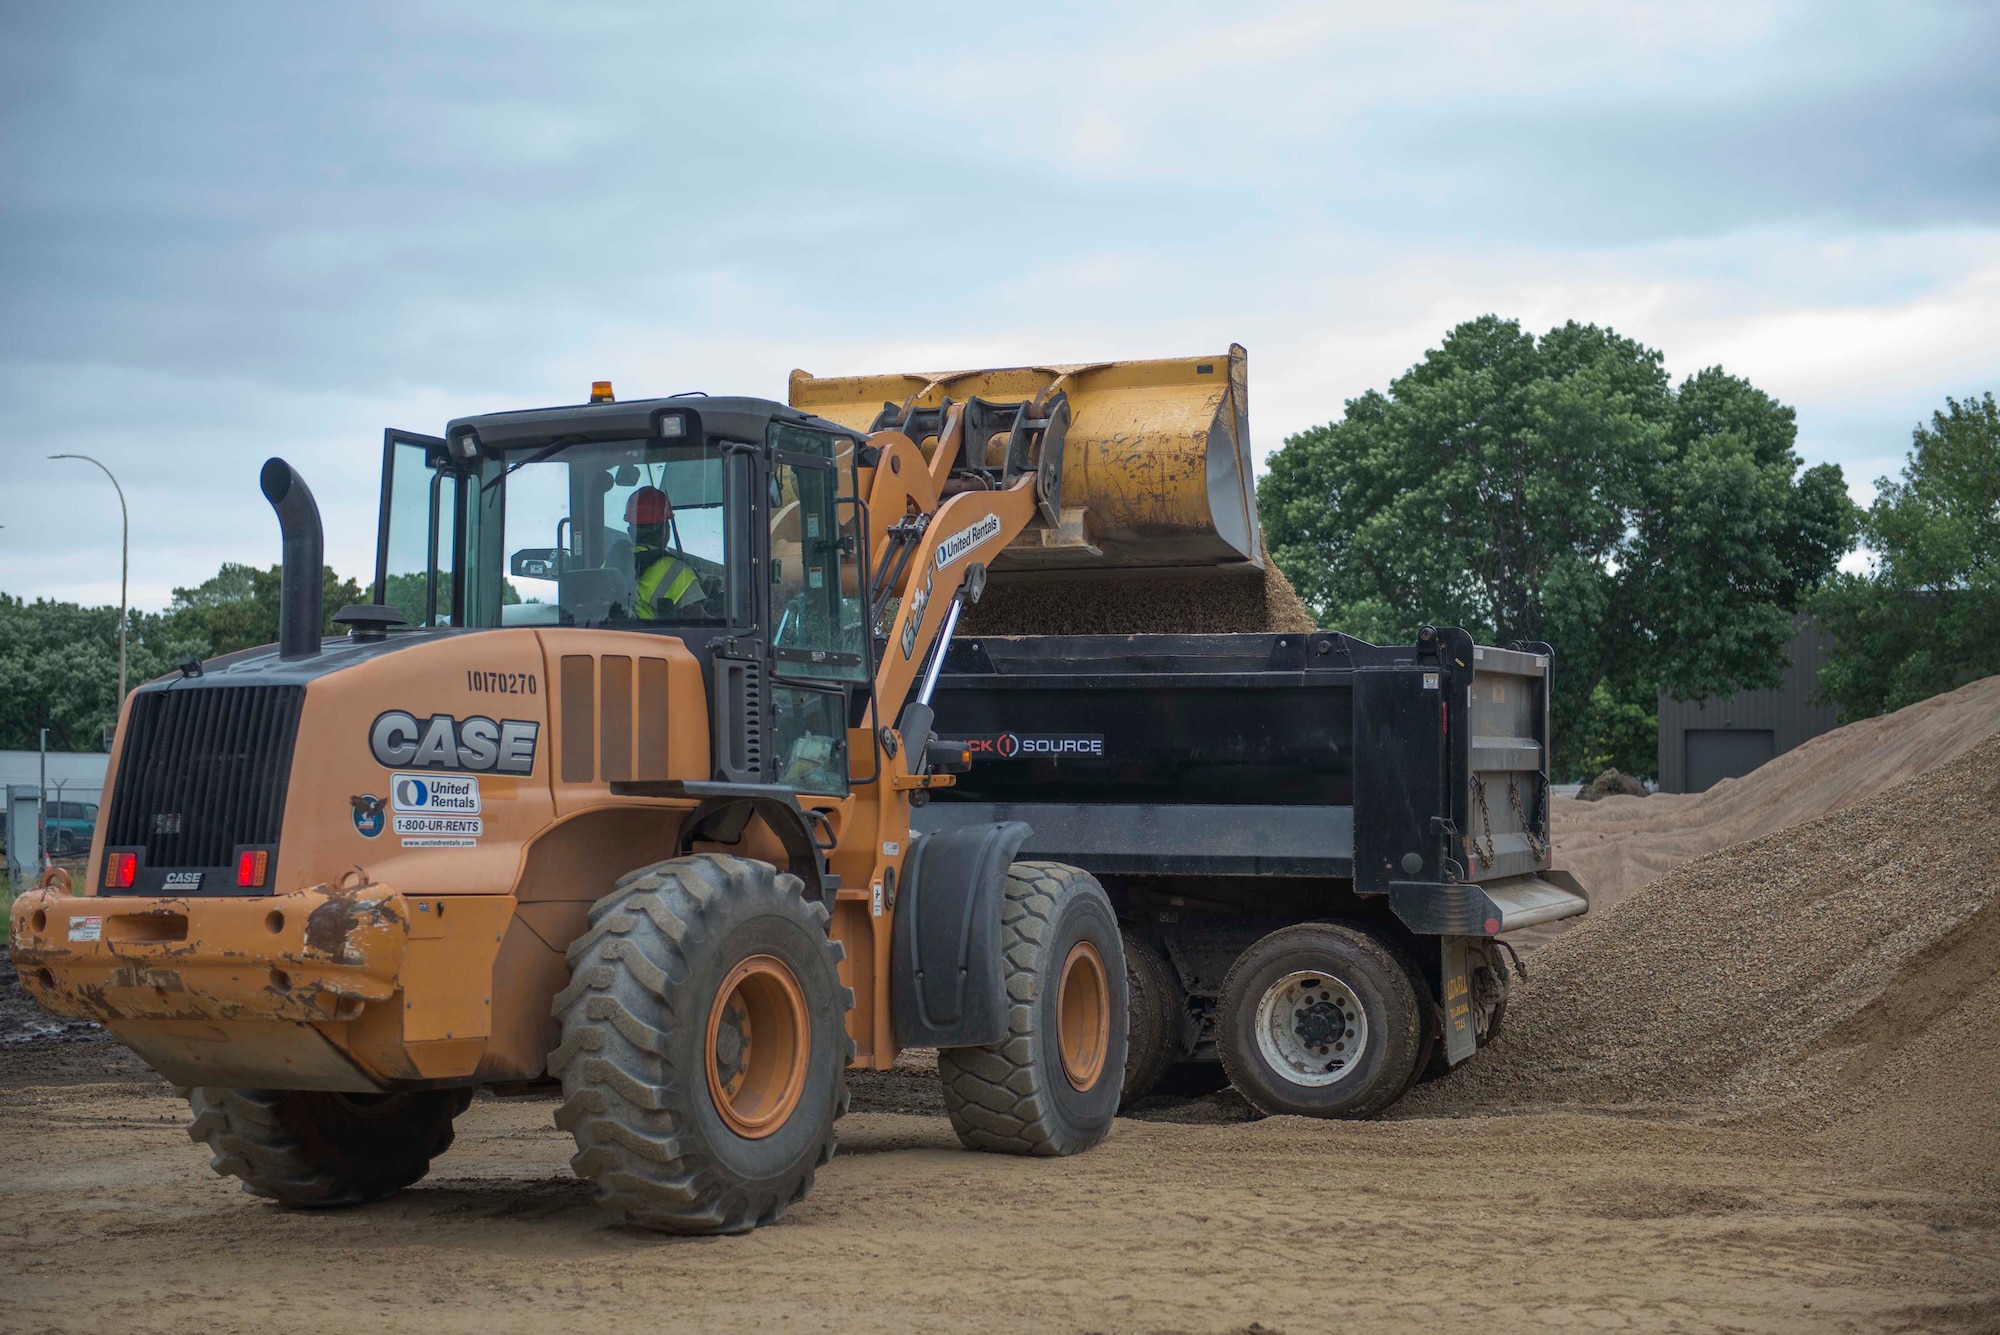 Master Sgt. Johnny Cunningham, 560th RED HORSE Squadron rotational NCO in charge, pours material into a 20-ton dump truck using a front end loader at a construction site on Minneapolis-St. Paul Air Reserve Station, Minn., July 10, 2019.